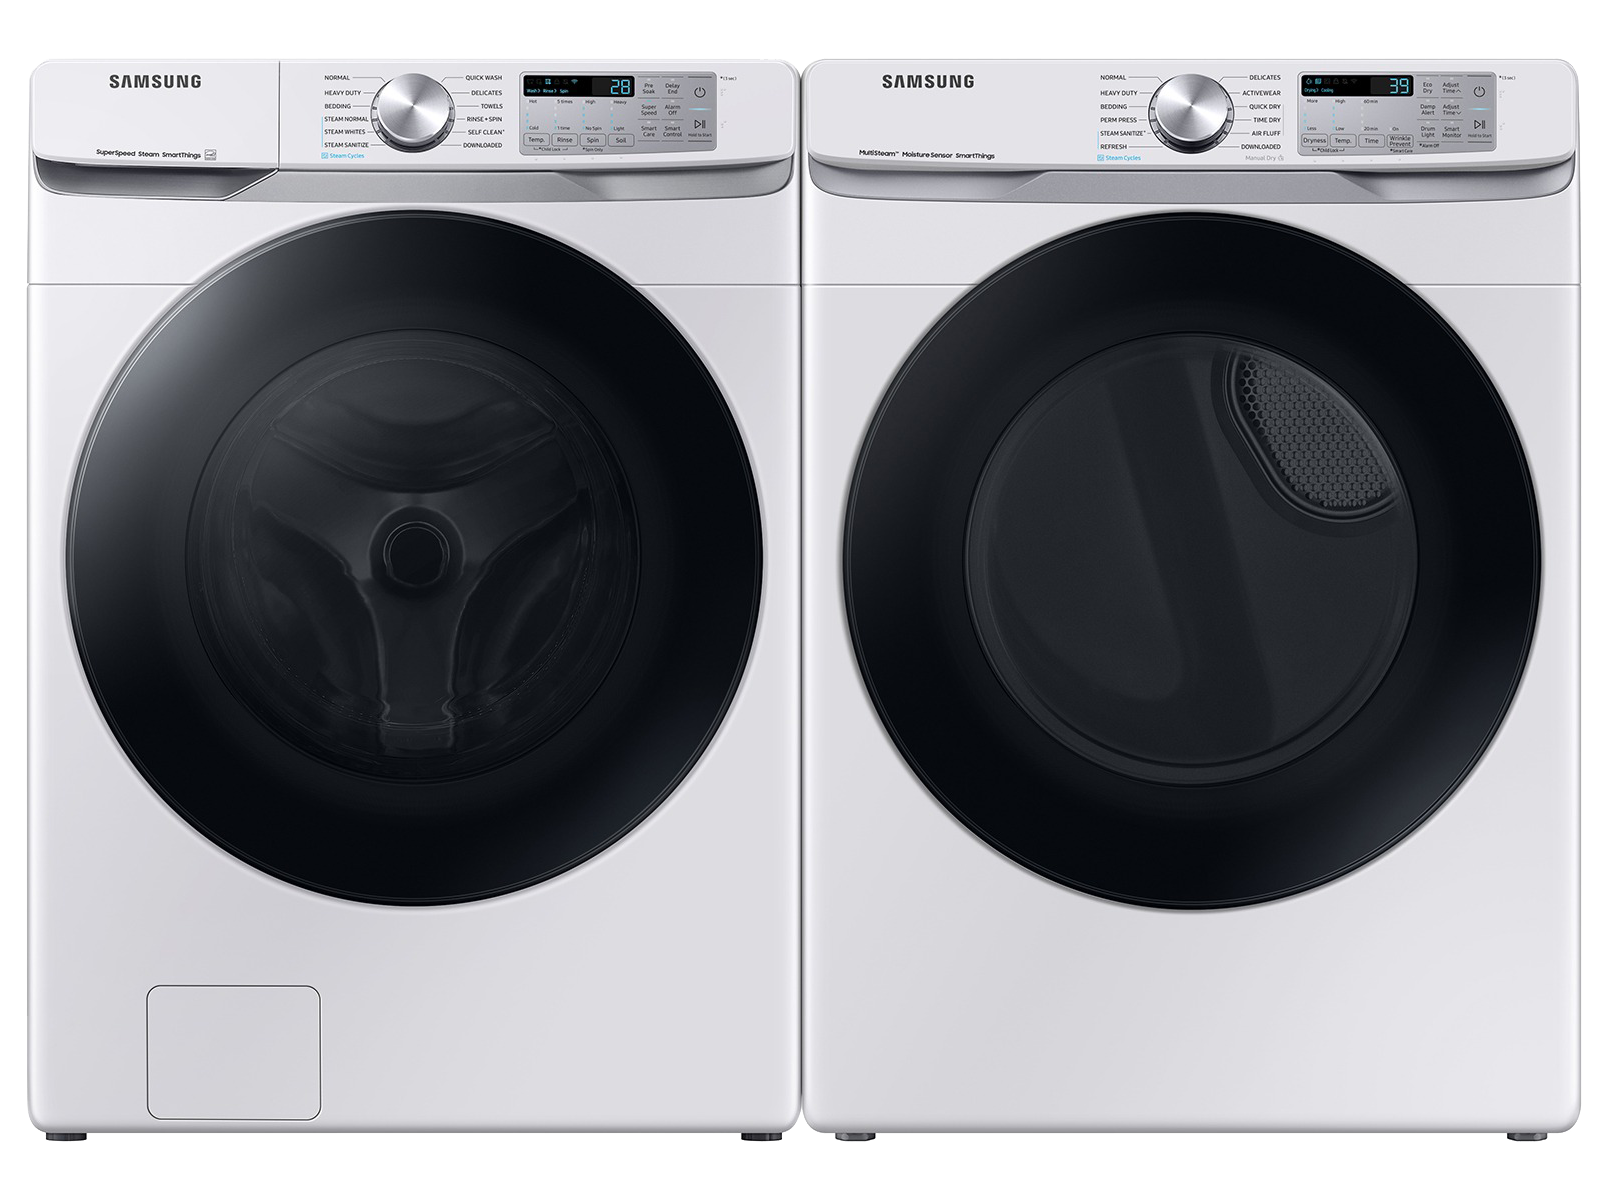 Samsung Large Capacity Smart Front Load Washer with Super Speed Wash & Smart Electric Dryer with Steam Sanitize+ in White(BNDL-1651774927109)